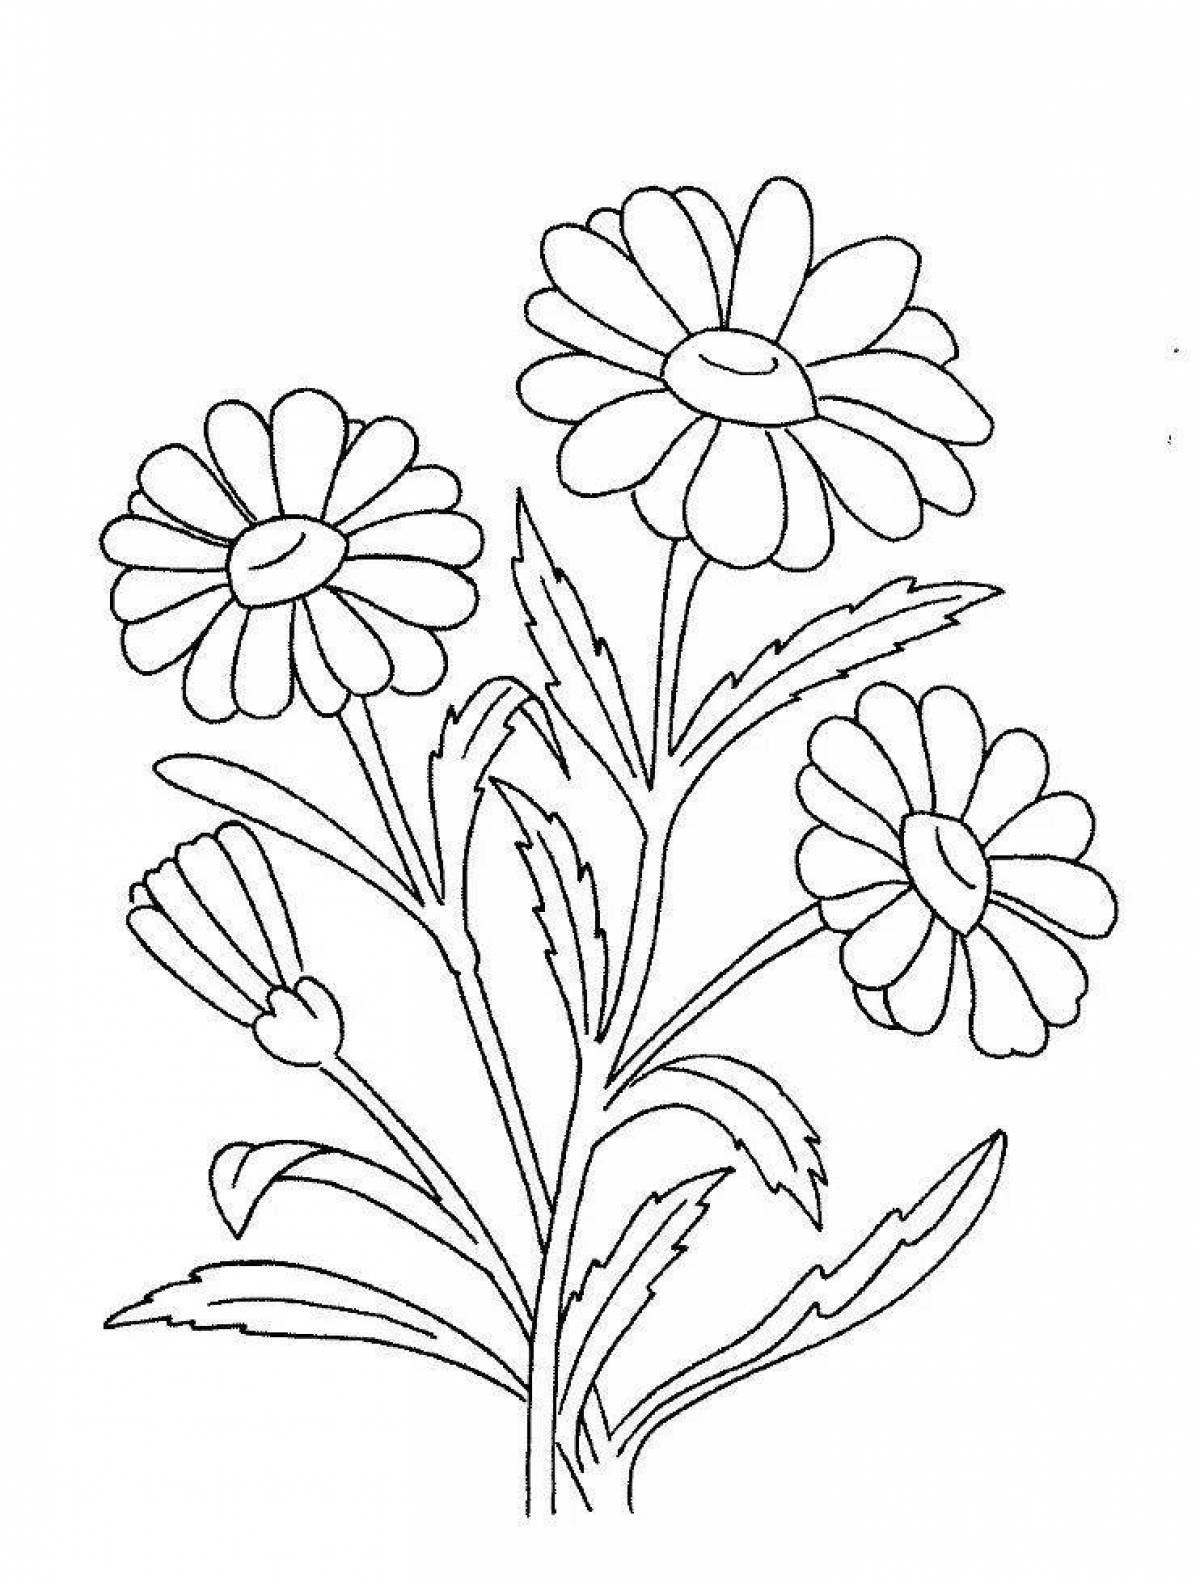 Coloring book gorgeous bouquet of daisies